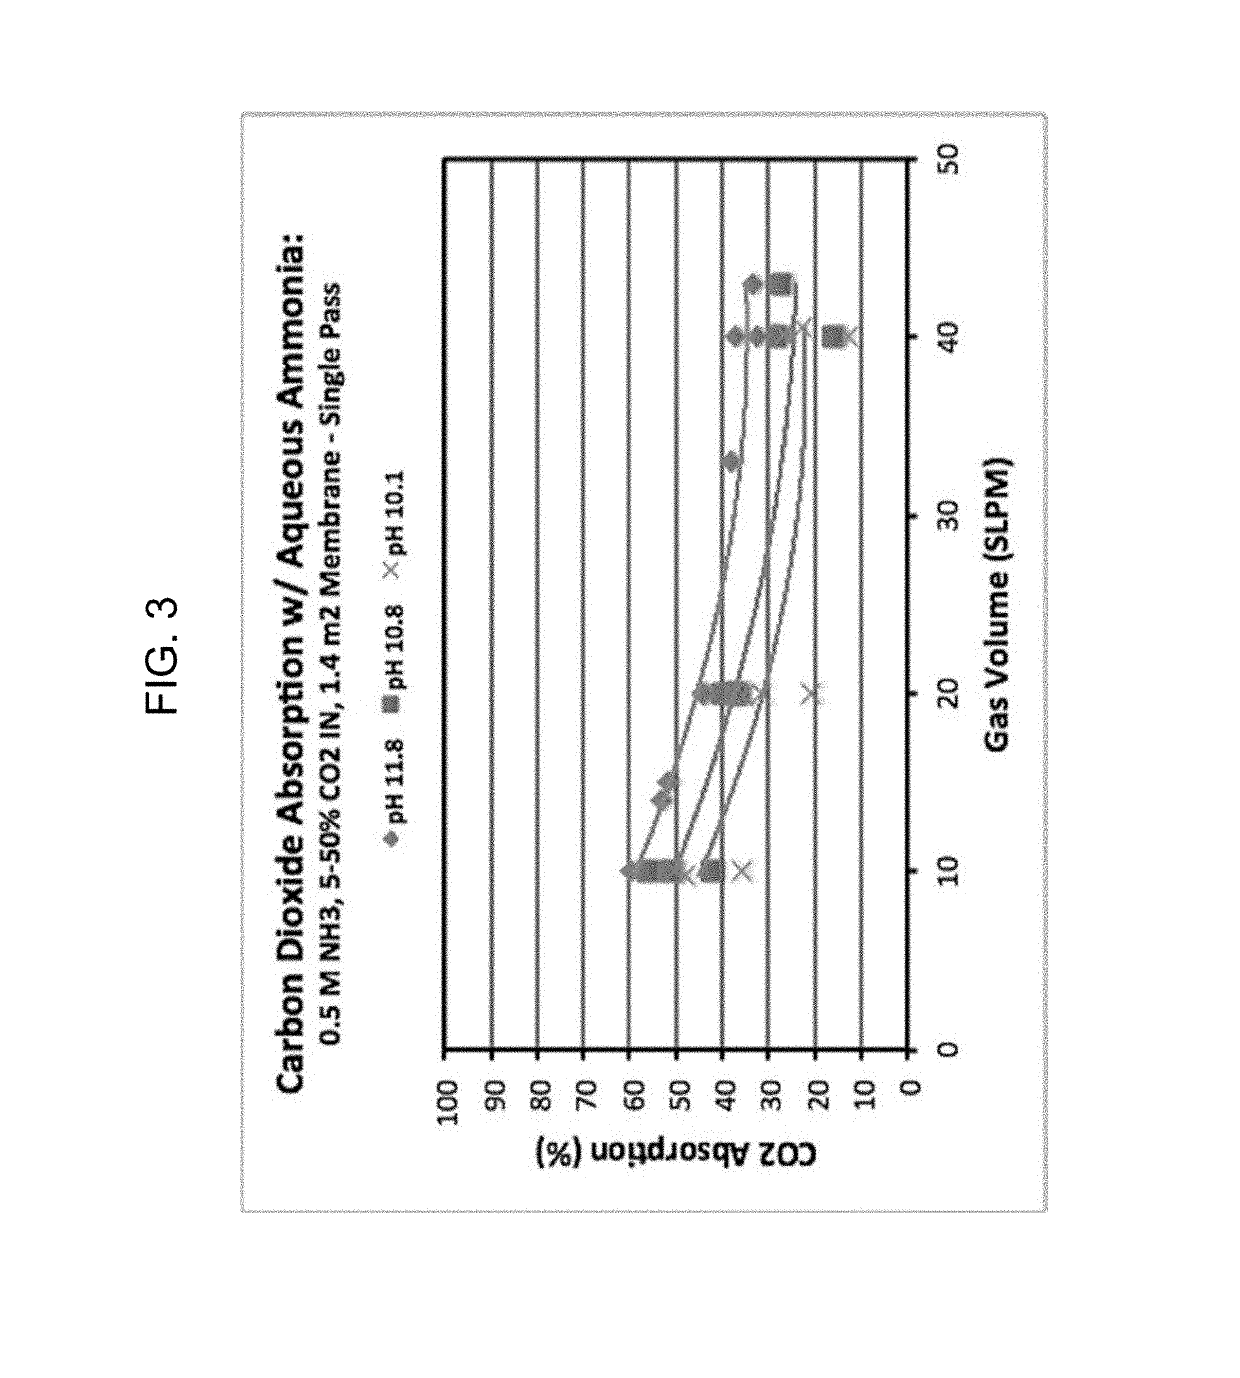 Ammonia mediated carbon dioxide (CO2) sequestration methods and systems